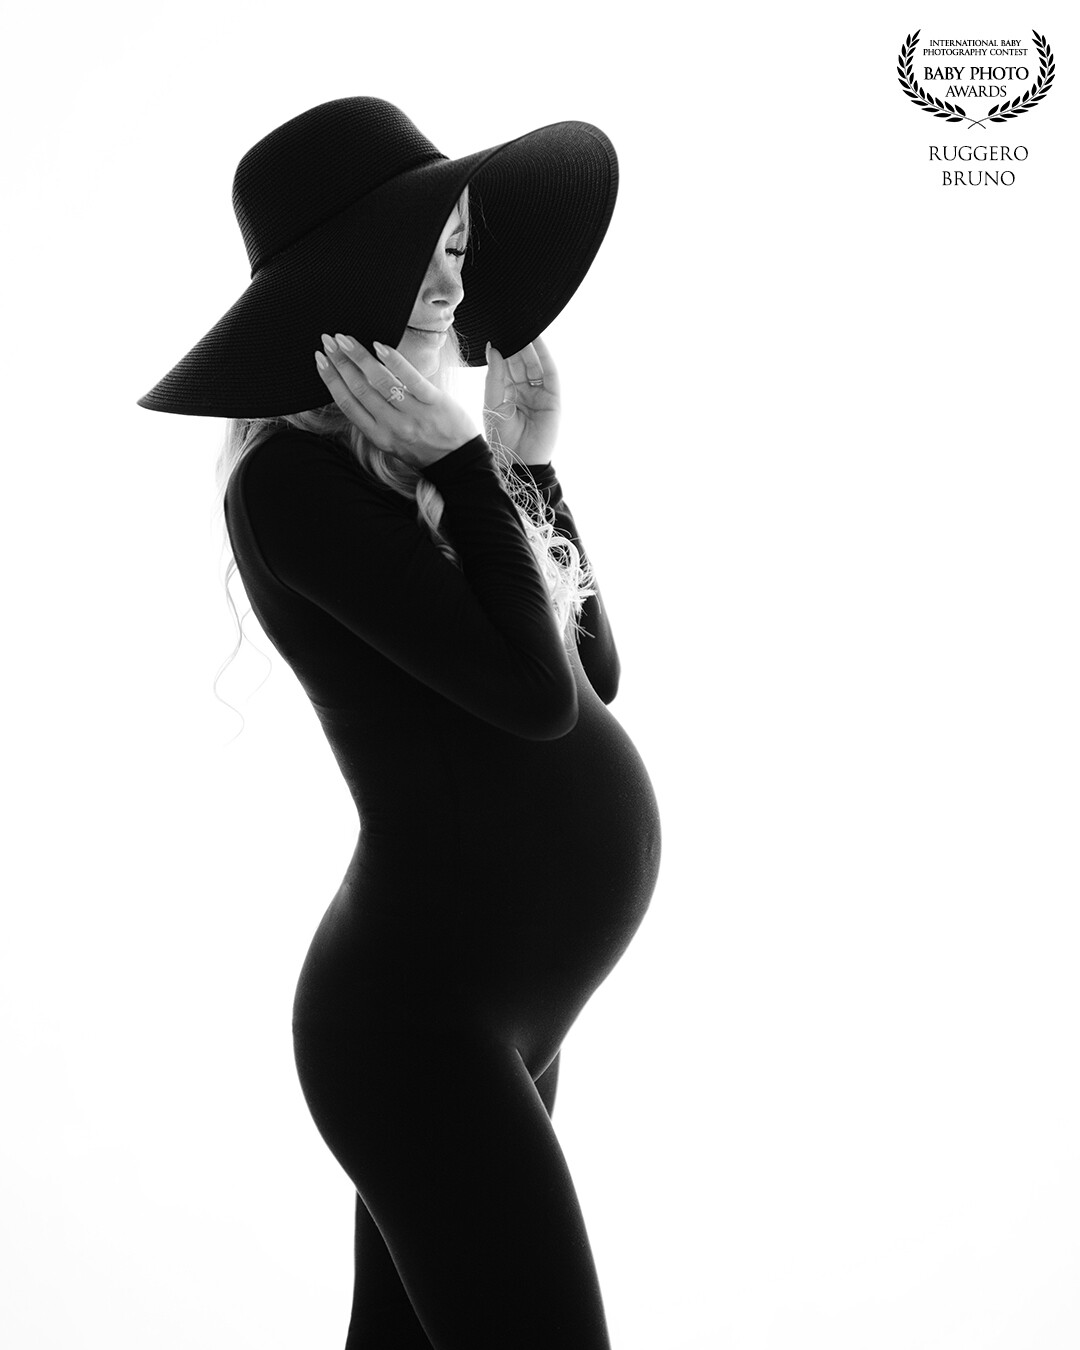 Lines of intimacy<br />
<br />
The backlight of black on white outlines the harmony and beauty of the pregnant woman's body, the large hat encapsulates in similar lines the intimacy of the exclusive emotions felt by the pregnant woman.